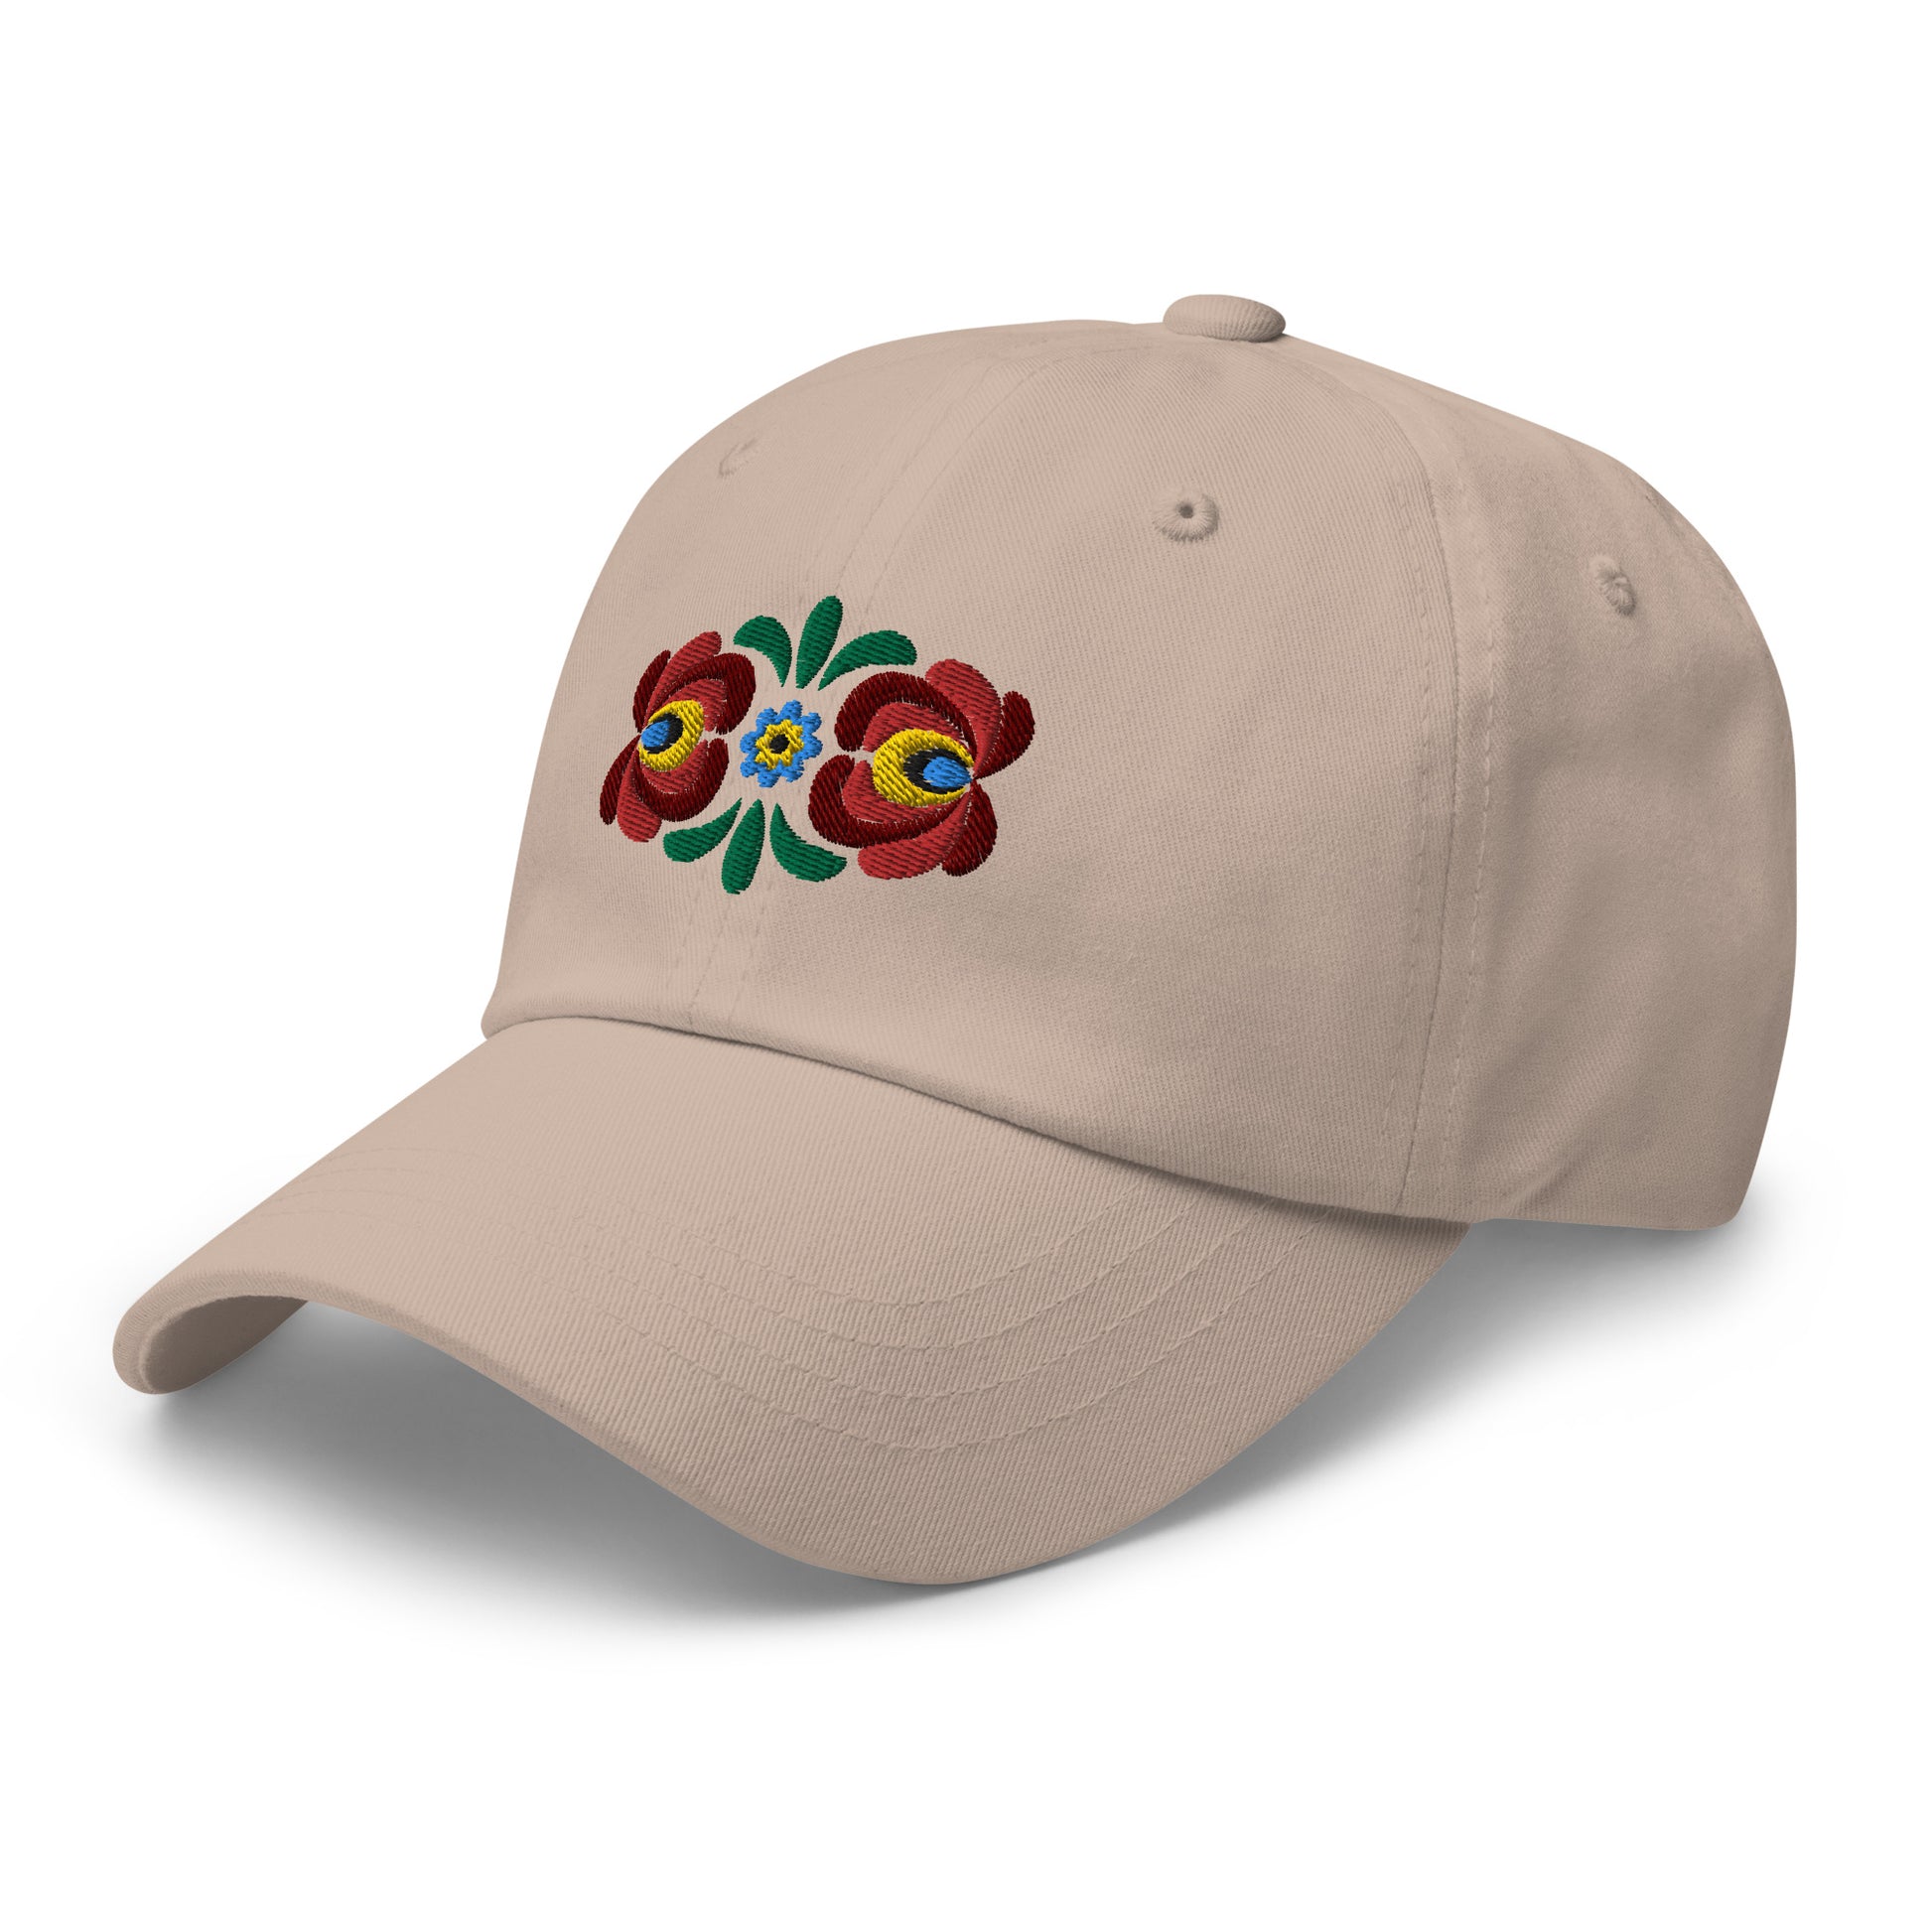 Hungarian Matyó Embroidered  Dad Hat - The Global Wanderer